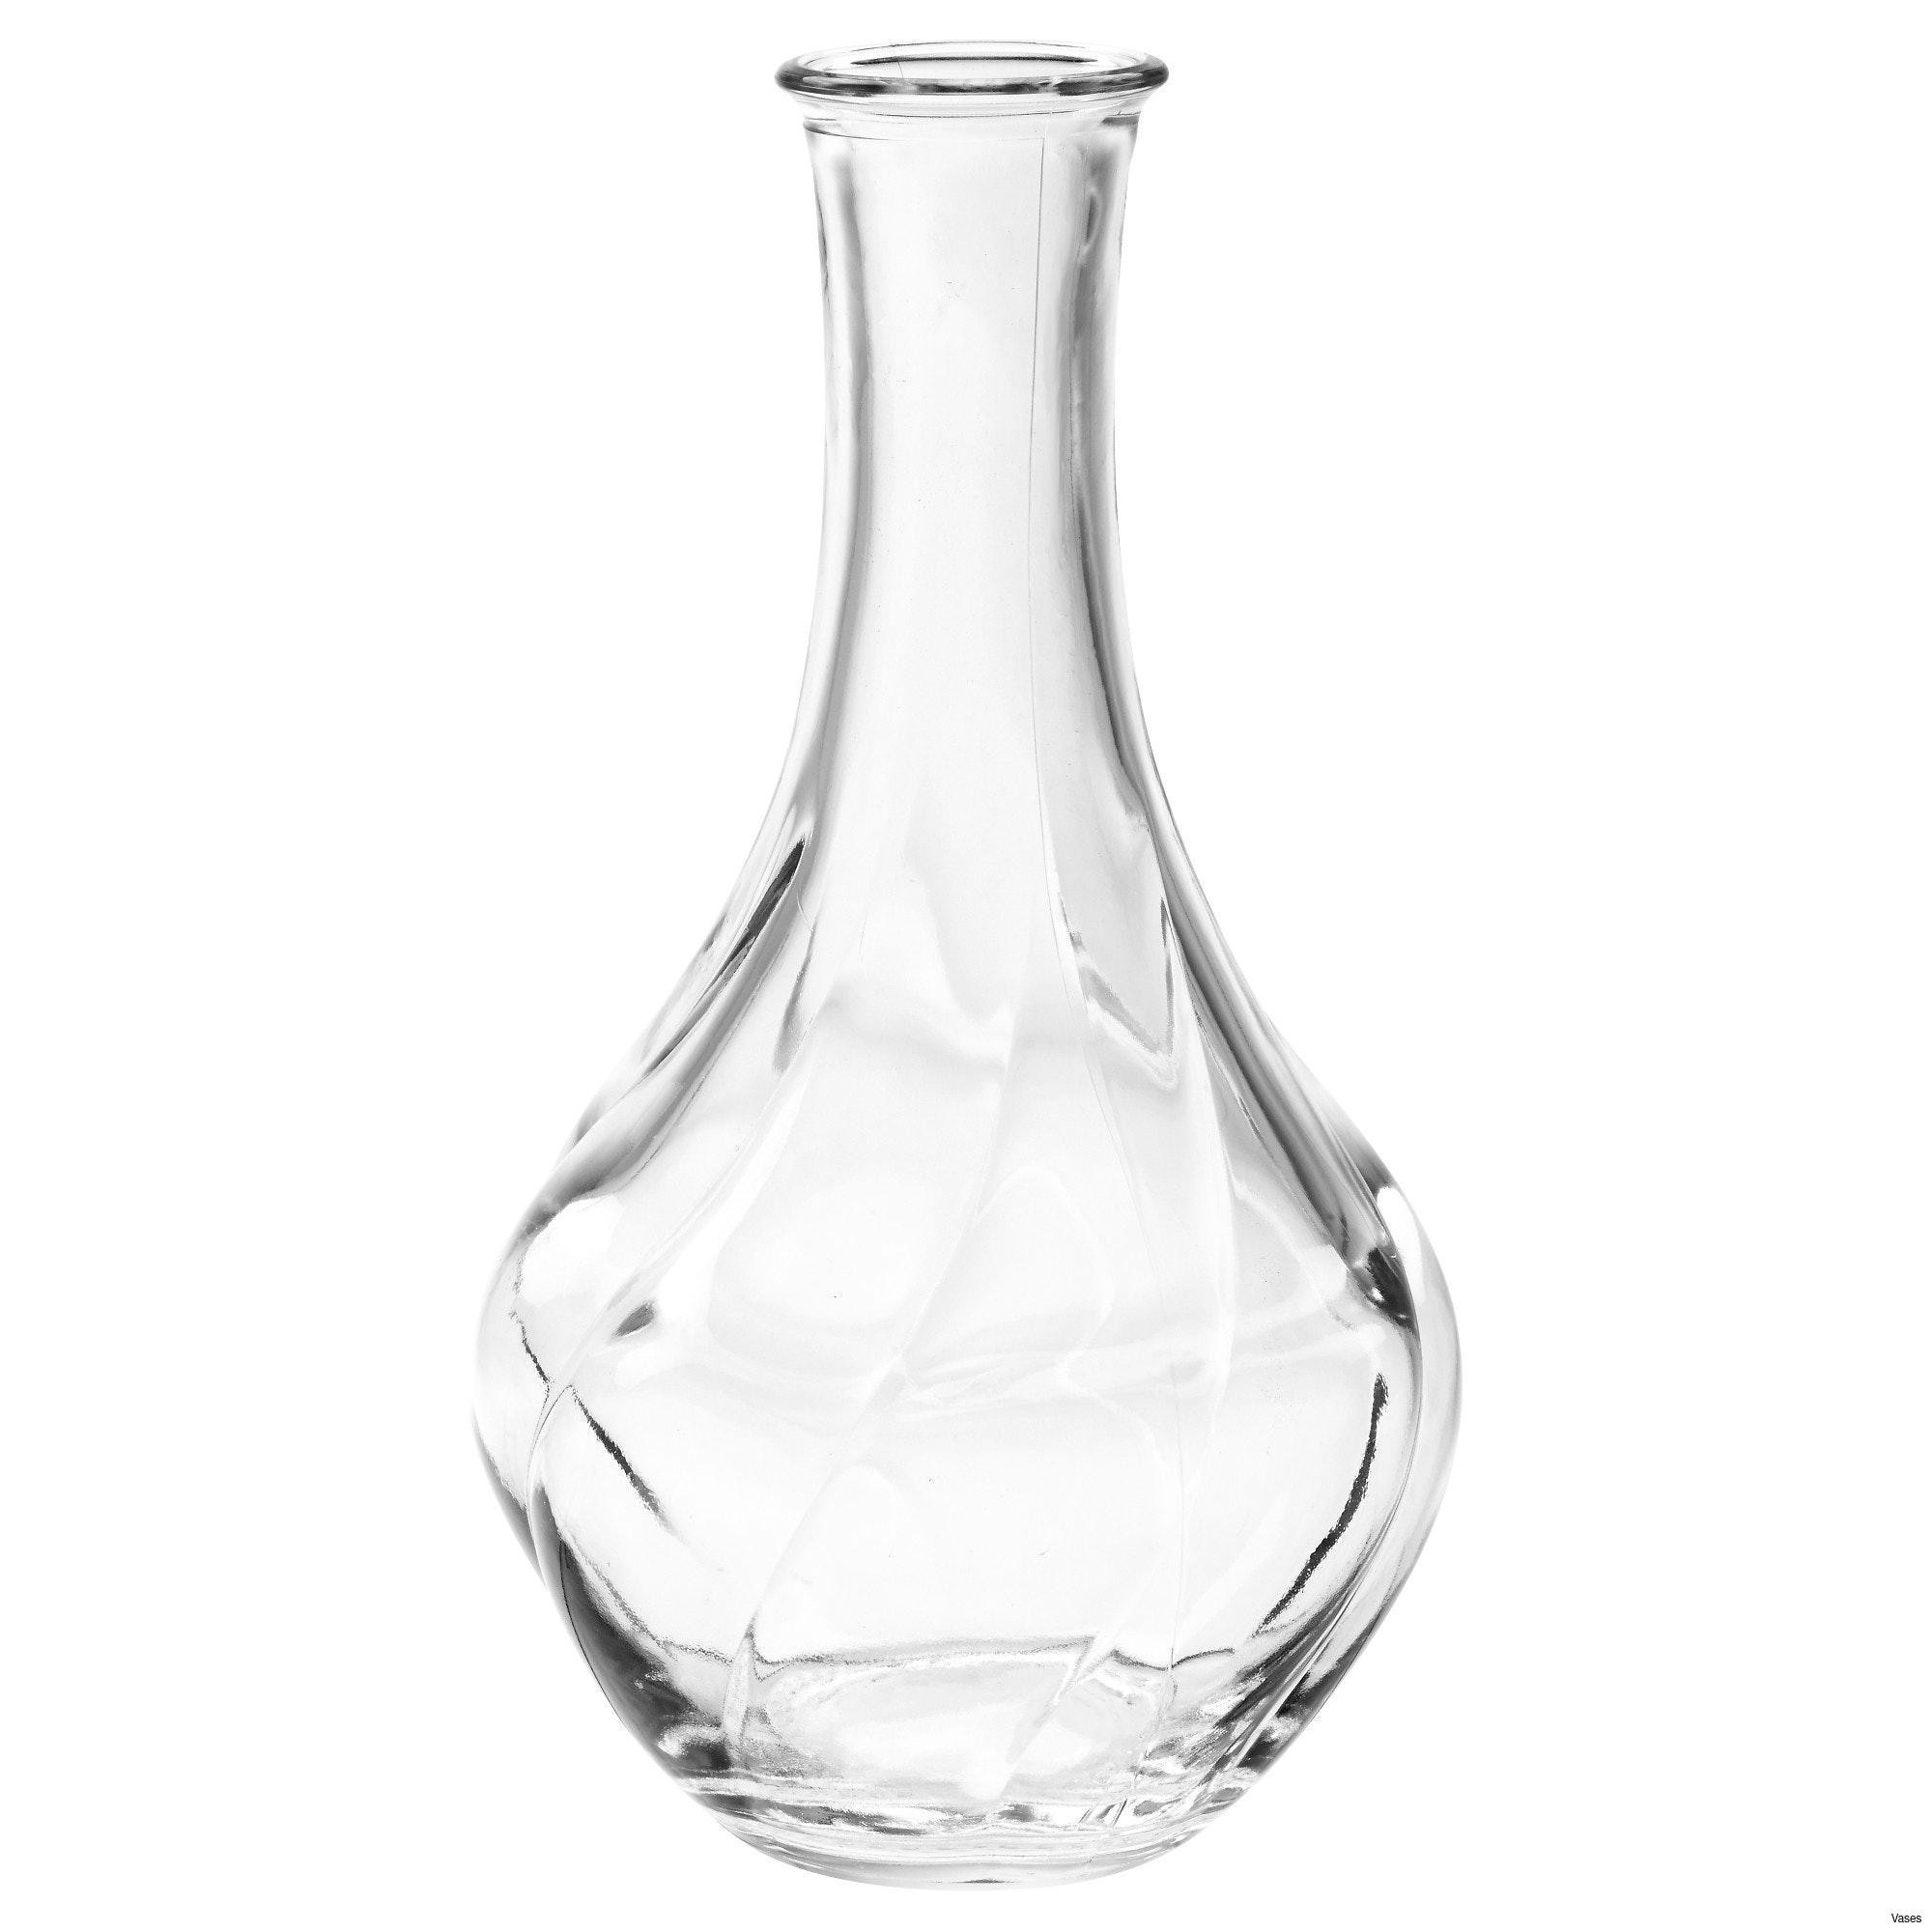 13 Lovely 24 Inch Clear Vases 2024 free download 24 inch clear vases of large glass vases gallery living room glass vases fresh clear vase for large glass vases gallery living room glass vases fresh clear vase 0d tags amazing and of